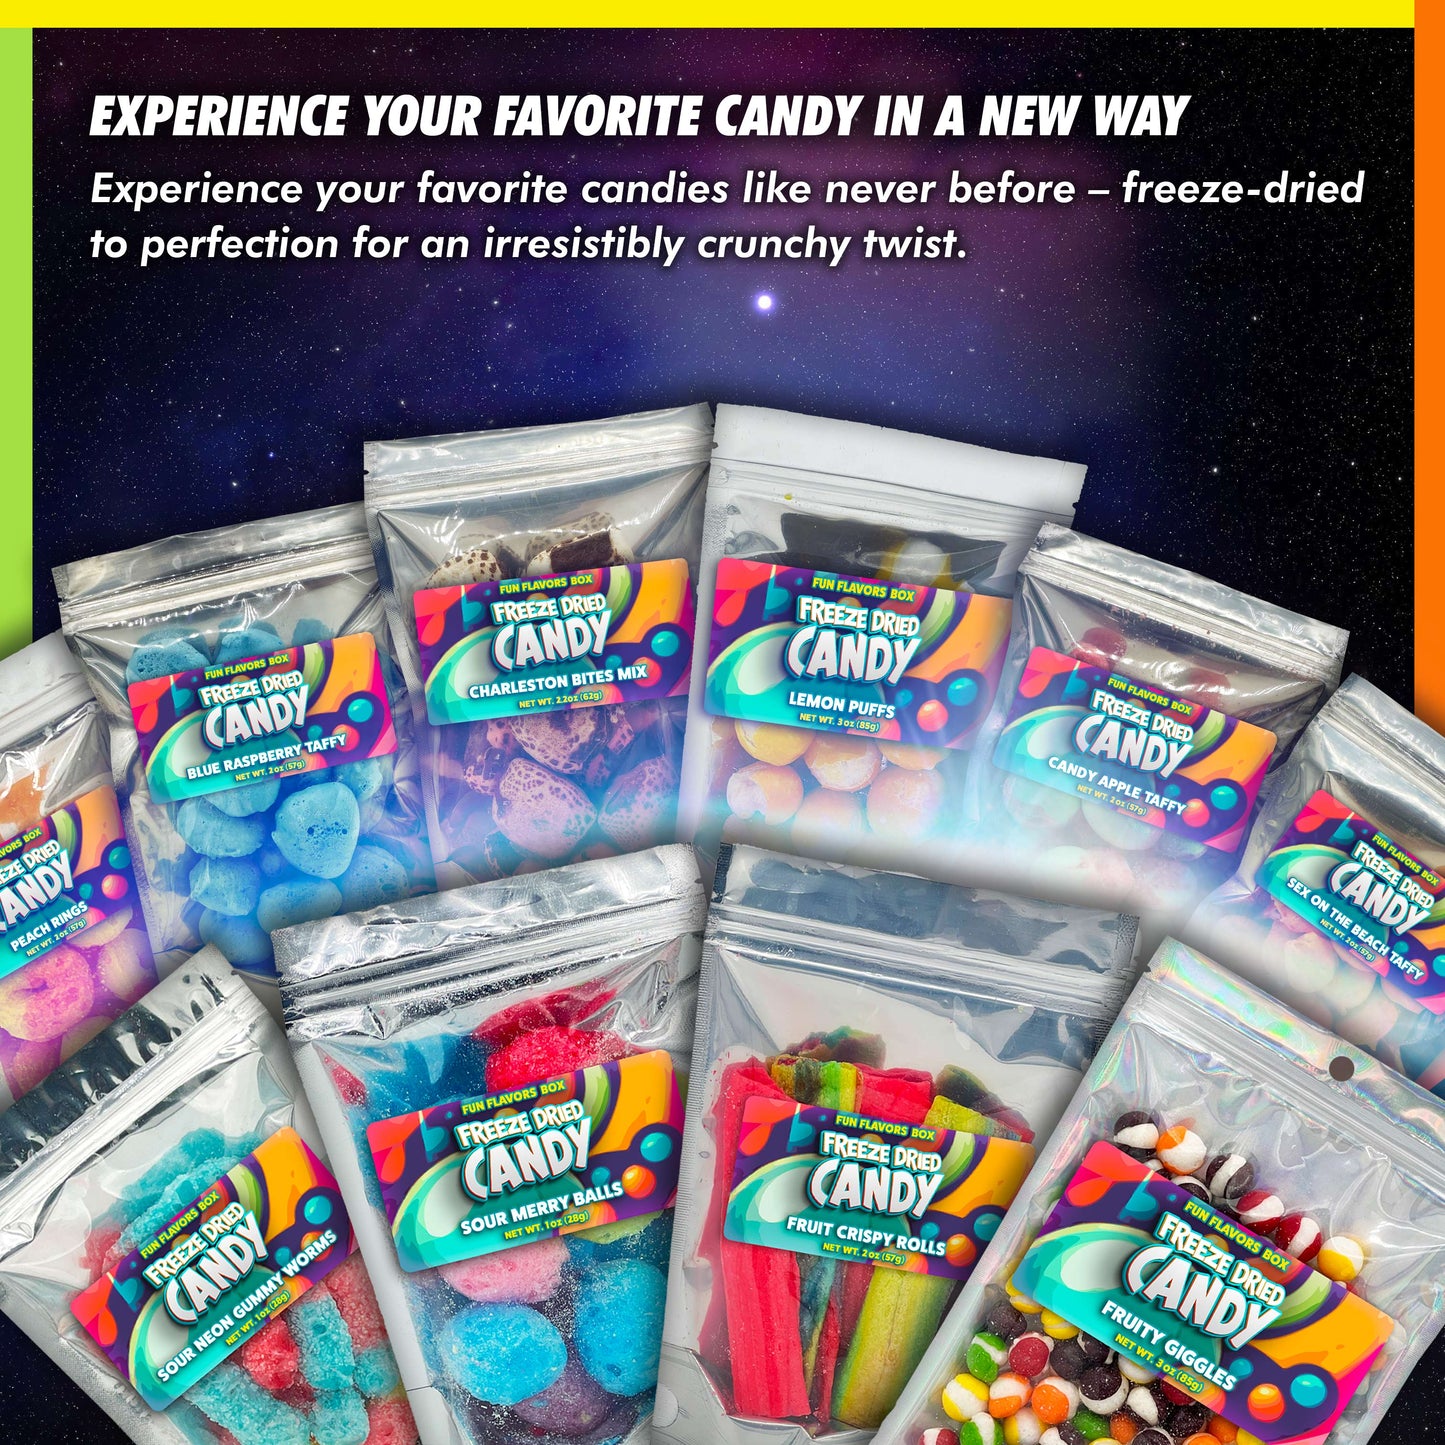 Freeze Dried Candy Turkish Taffy Variety Pack Crunch Snack Treats Space Theme Party Favor, 2.5 oz